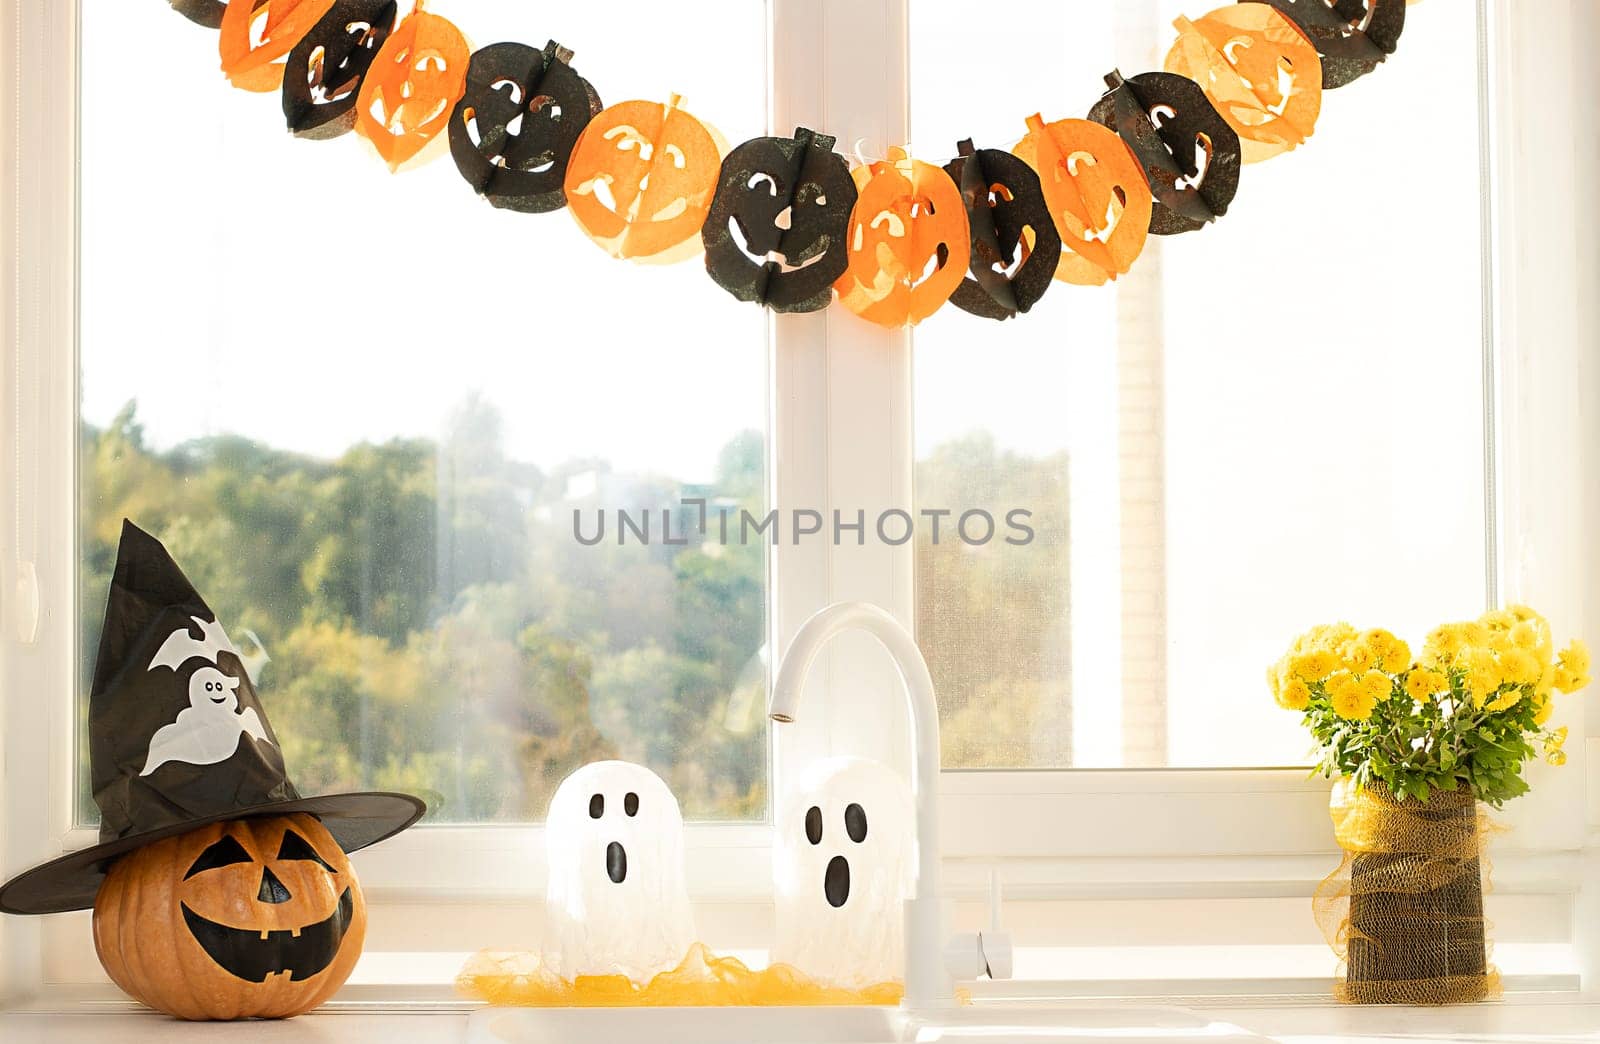 Halloween holiday concept. A pumpkin with a painted face, a white ghost and a bouquet of yellow chrysanthemum flowers in a black vase against the background of a window in home interior.